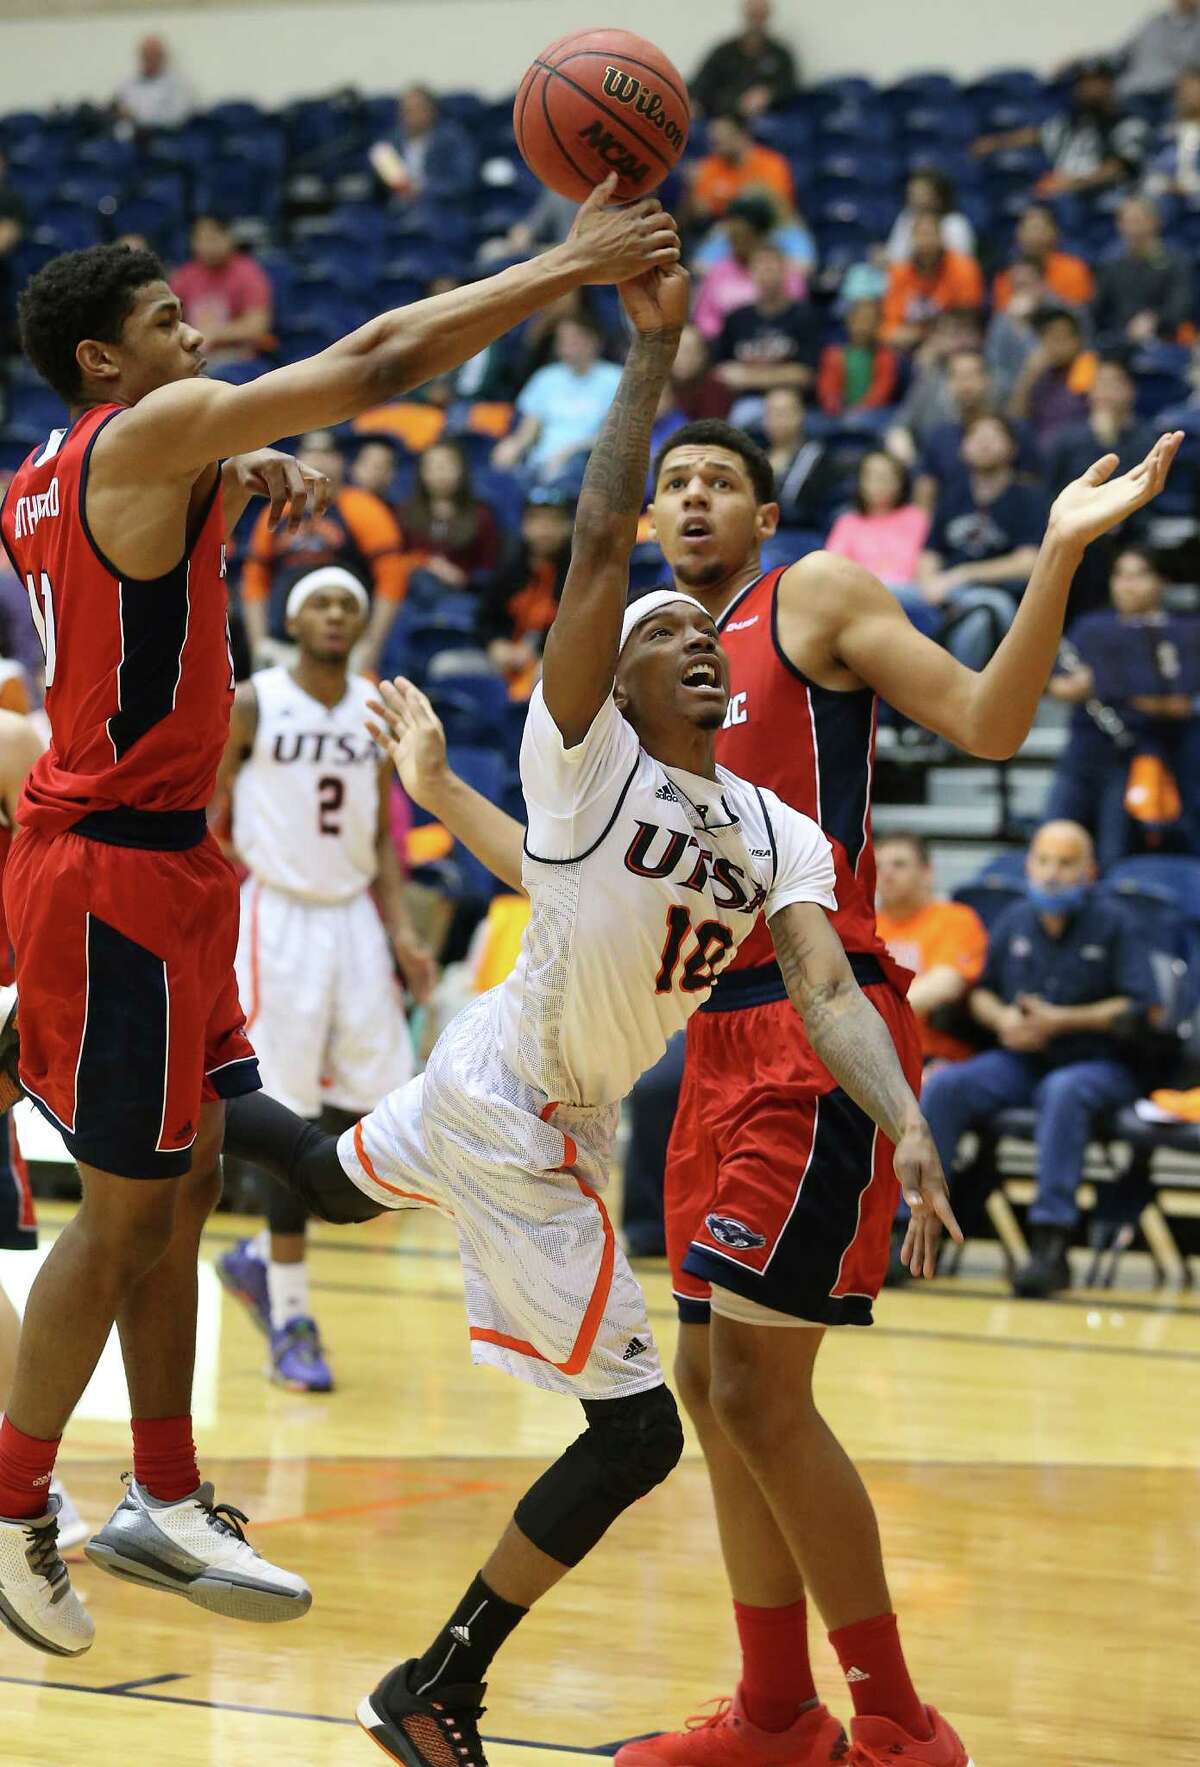 Christian Wilson gets fouled as he takes the ball in to challenge Nick Rutherford (left) and Ronald Delph as UTSA hosts Florida Atlantic in men's basketball at the UTSA Convocation Center on January 23, 2016.